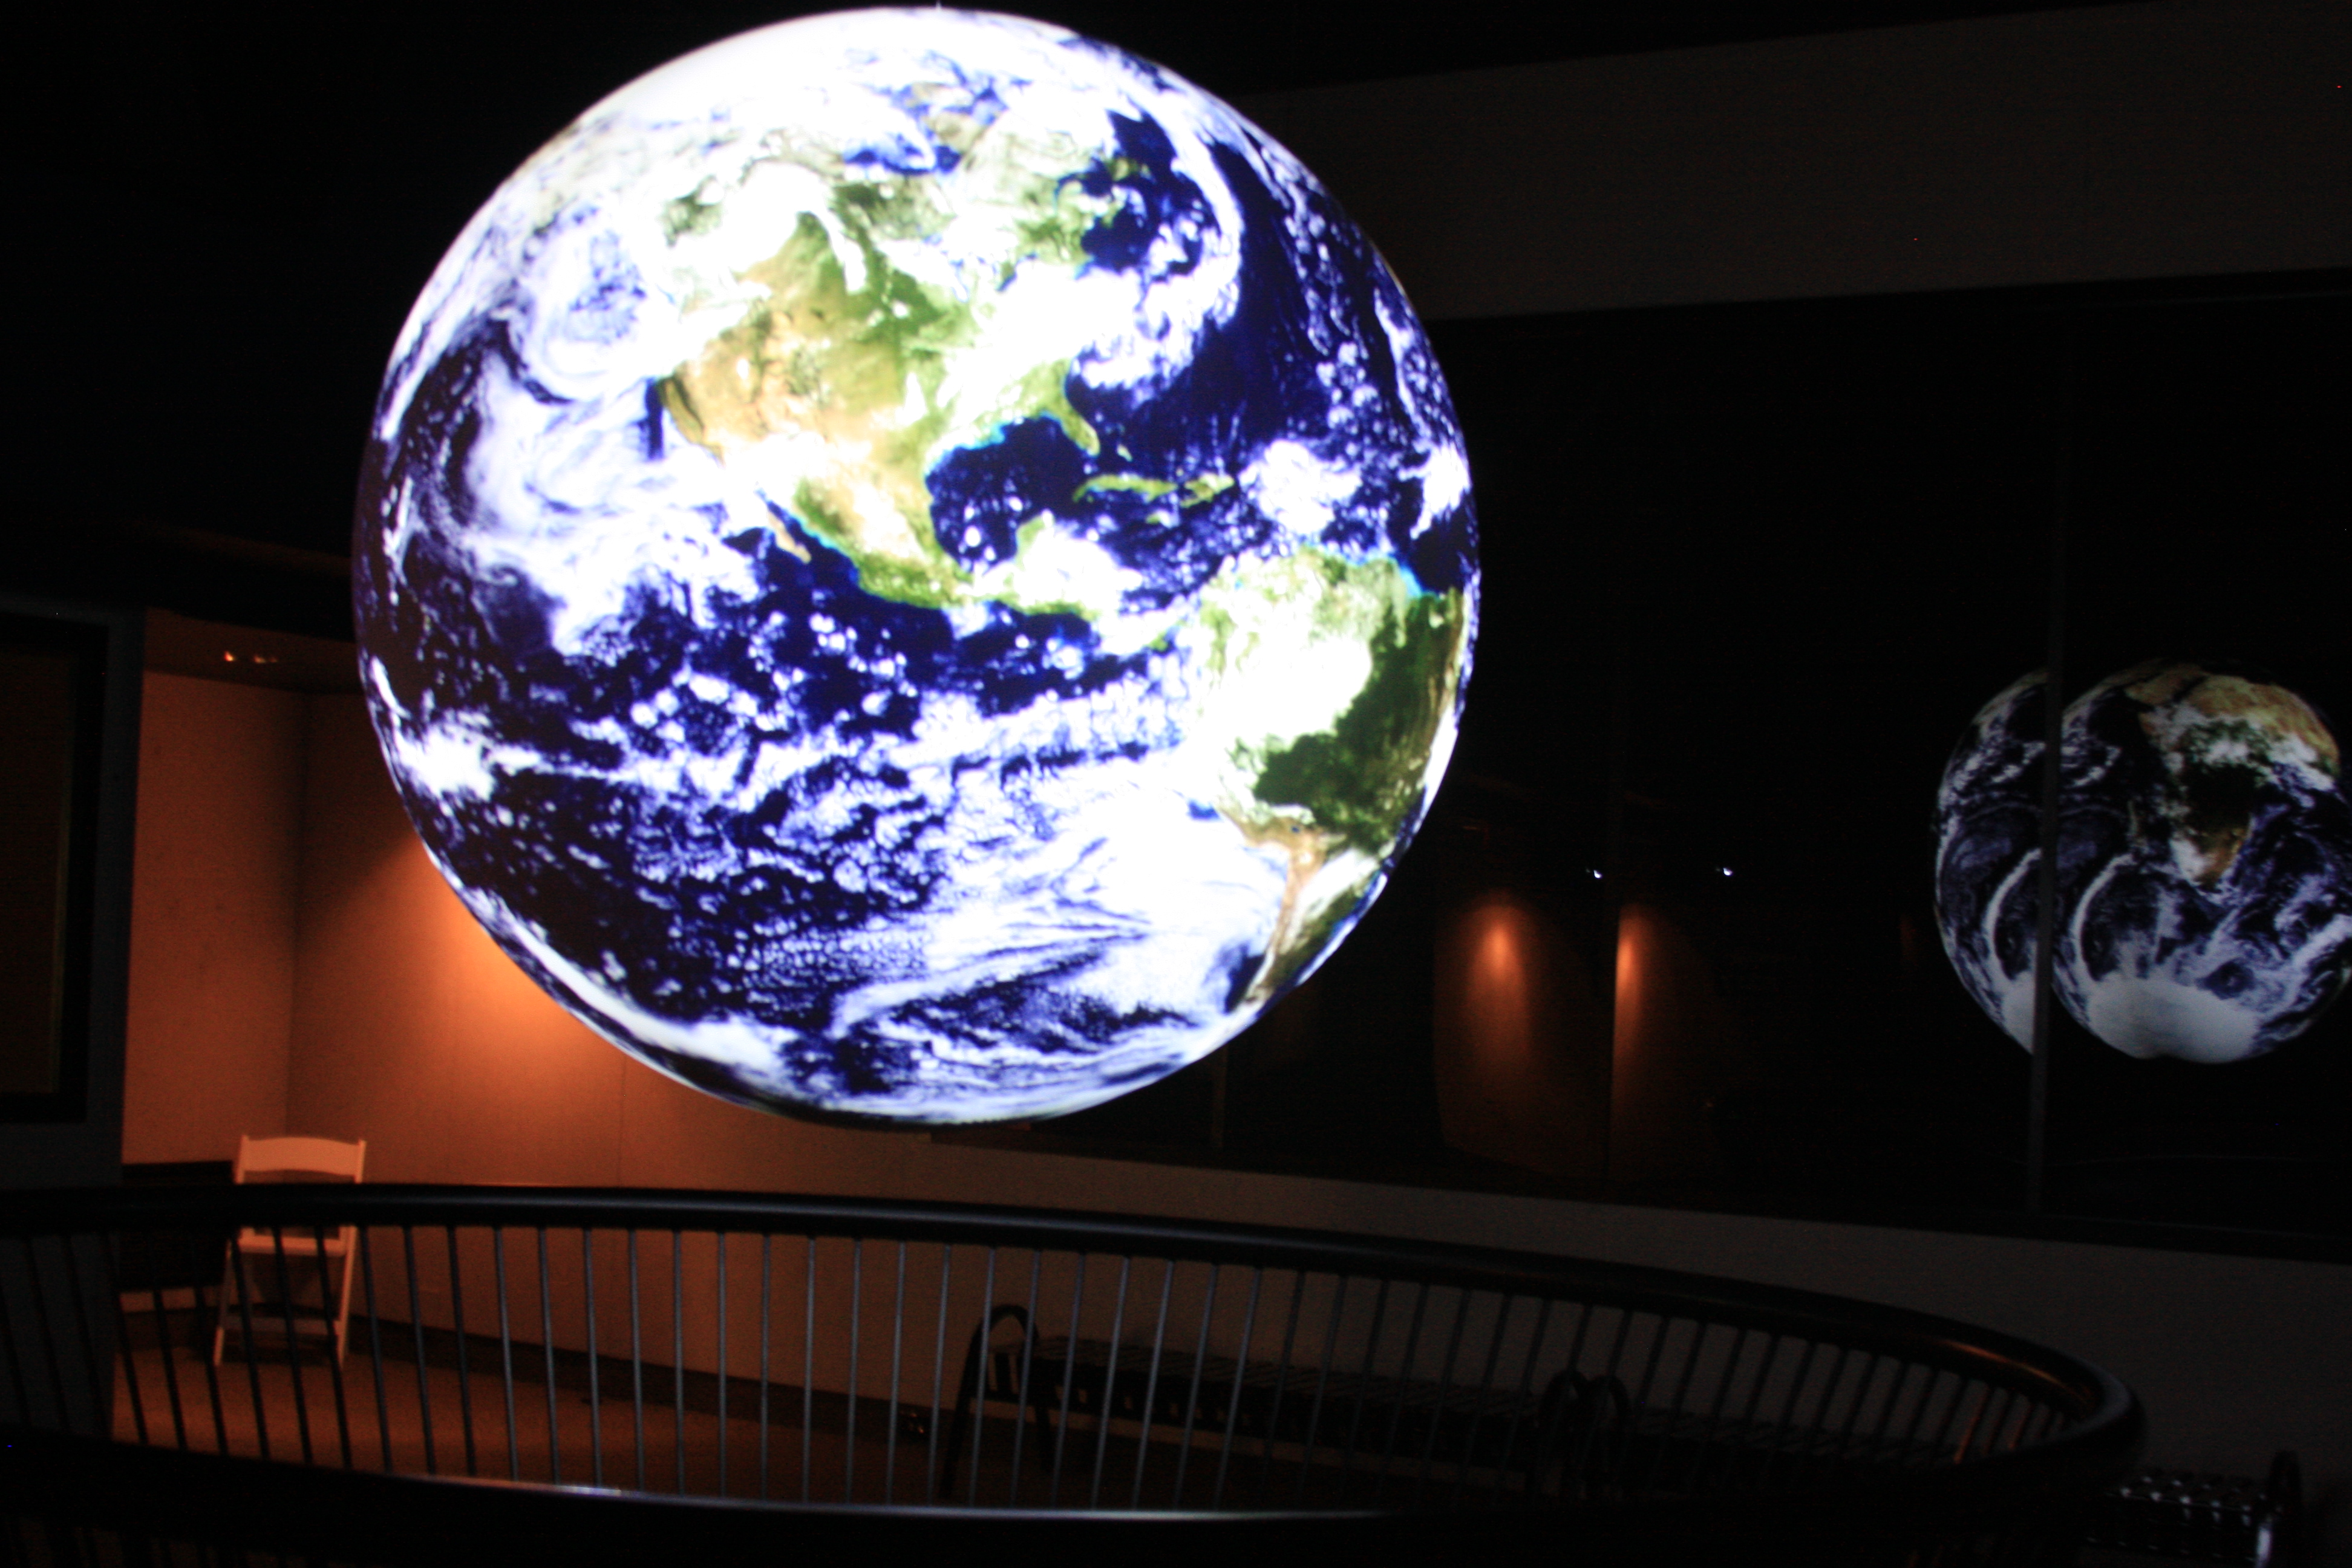 Science On a Sphere displays satellite imagery of the Earth in an empty theater. A reflection of the Sphere is visible in some glass in the background